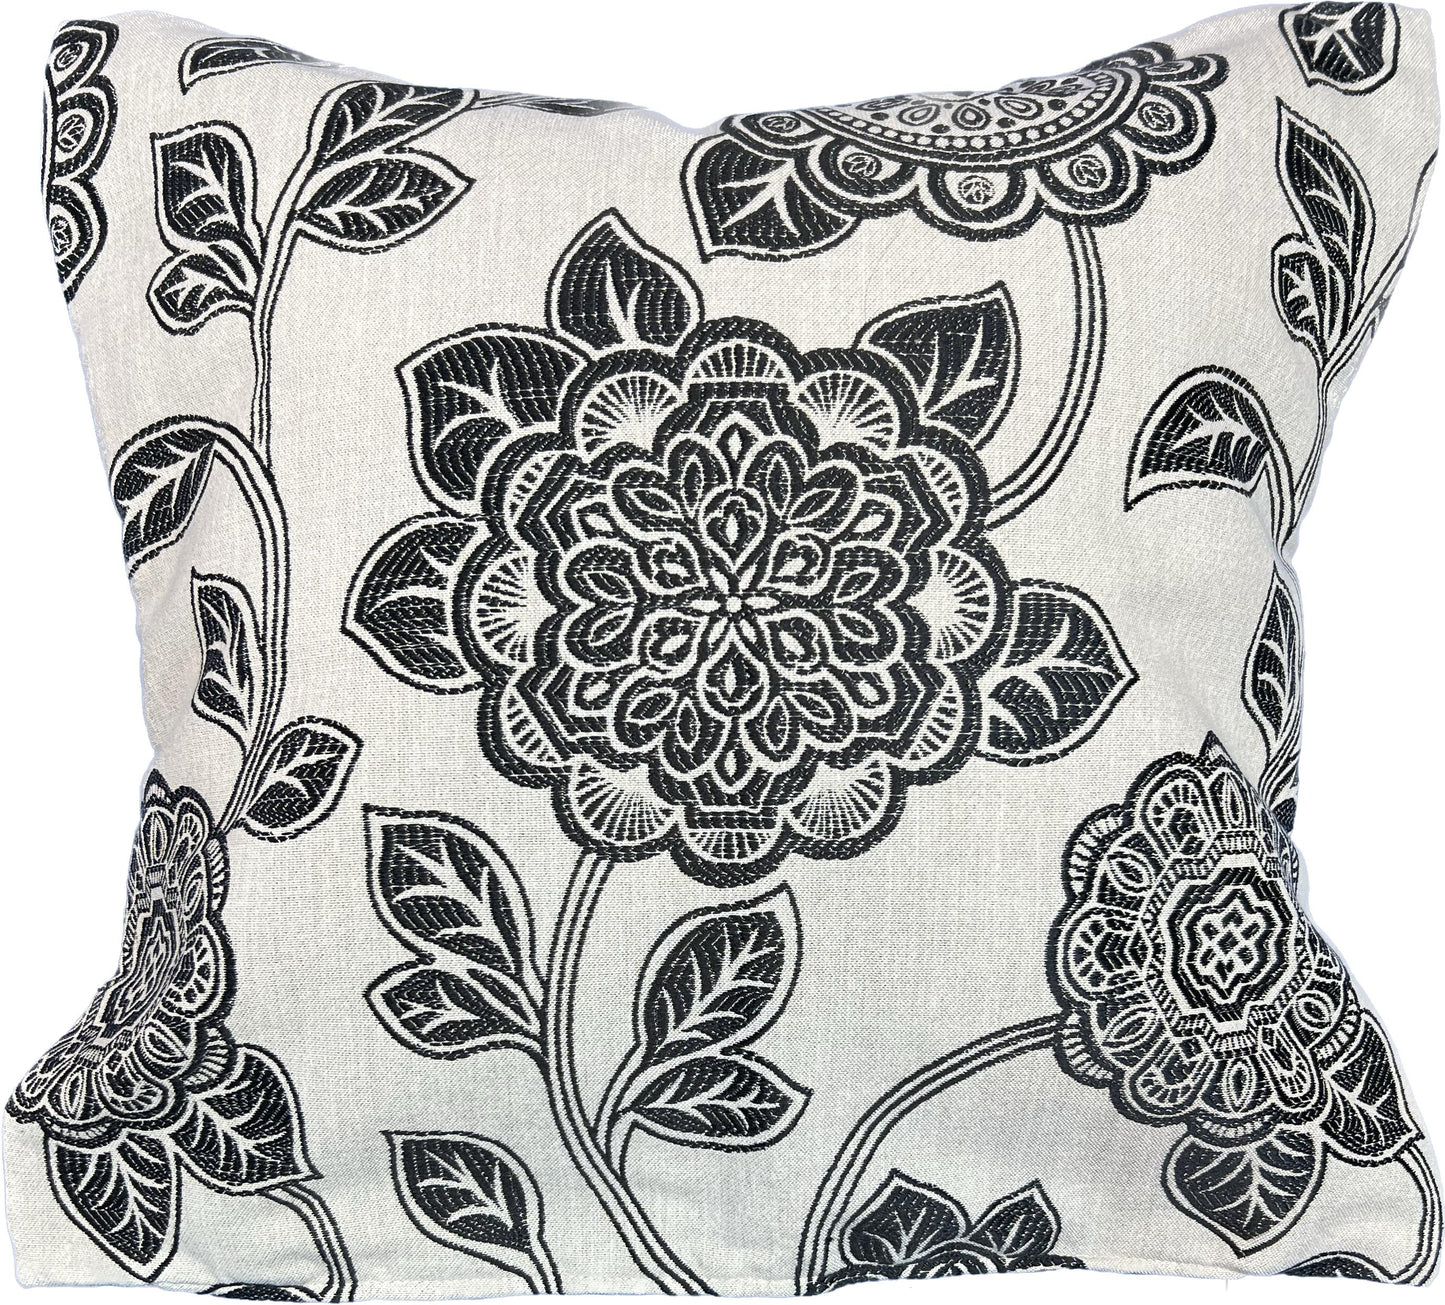 18"x18"  Floral Pillow Cover (JF Fabrics: August 98)